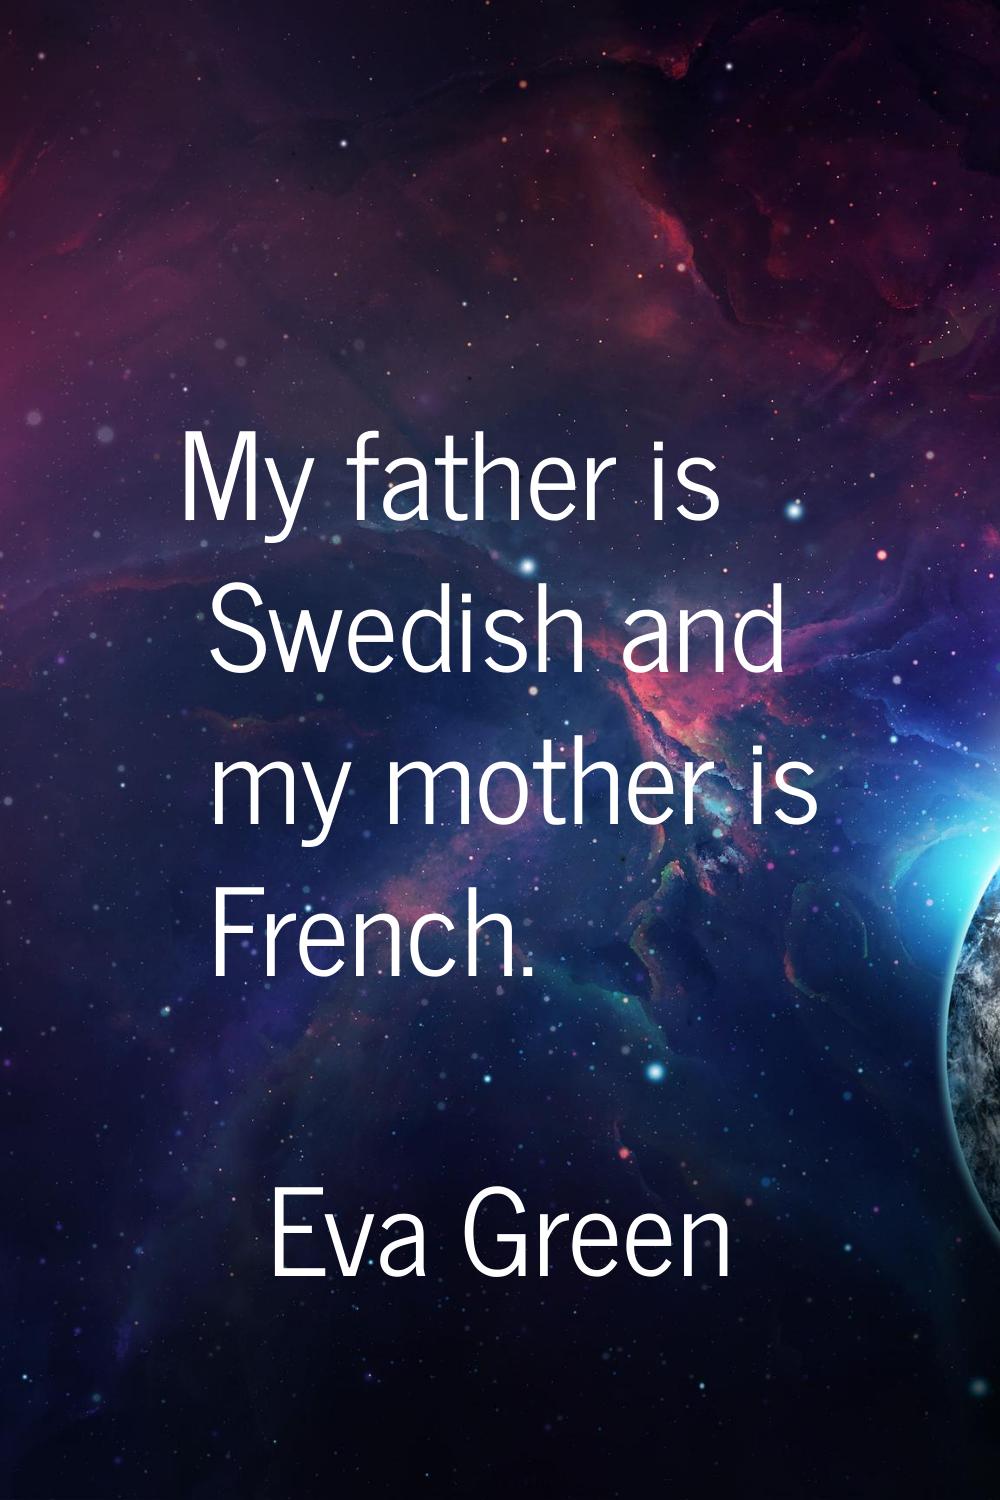 My father is Swedish and my mother is French.